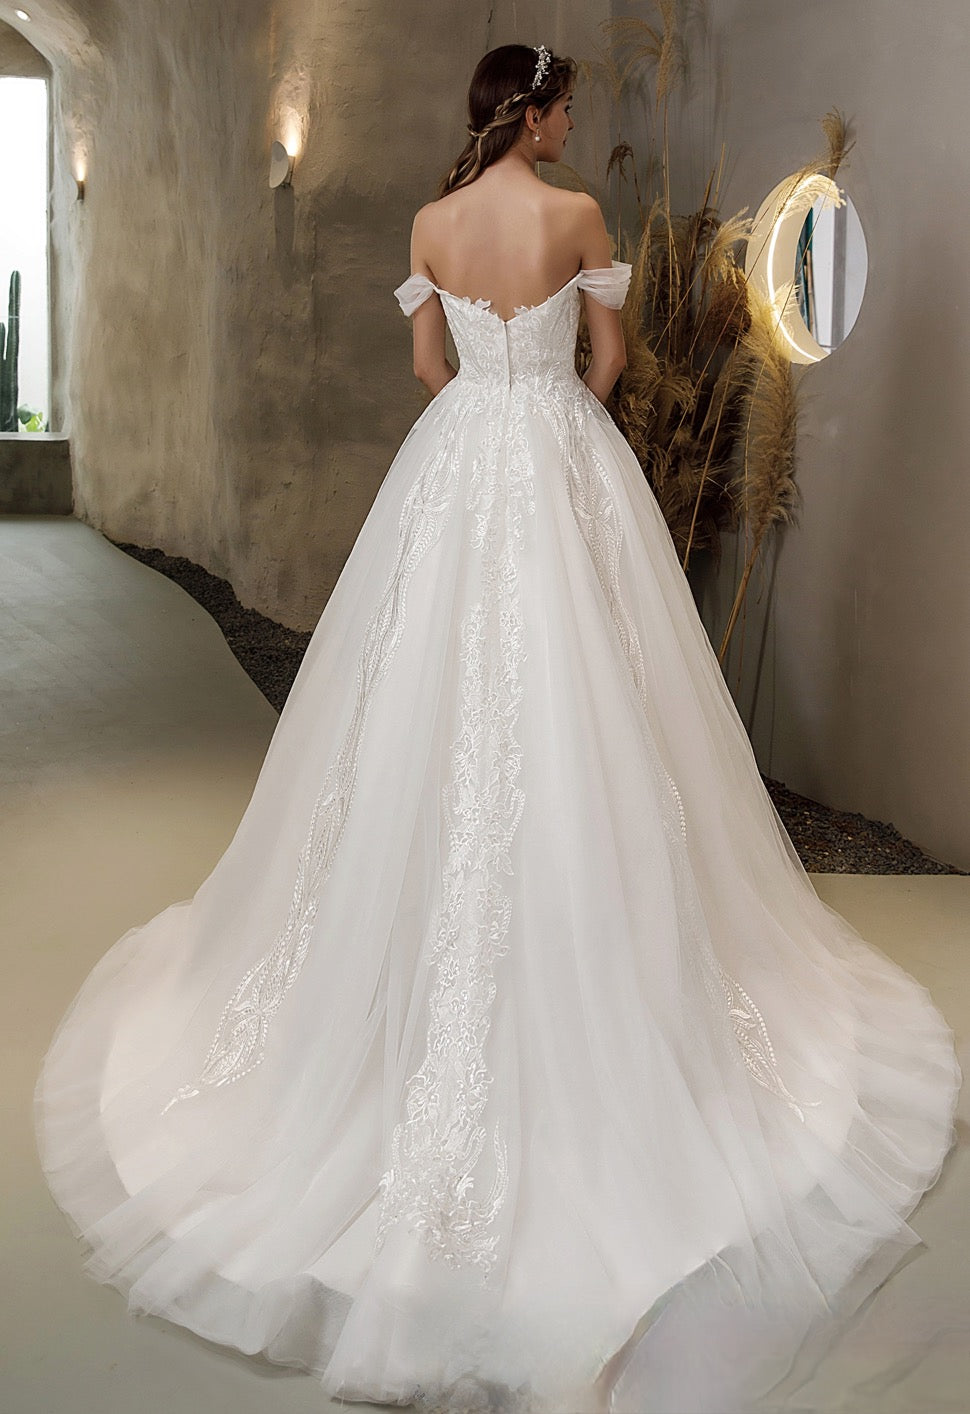 Princess Sweetheart Lace Tulle Ballgown Wedding Dress – TulleLux Bridal ...